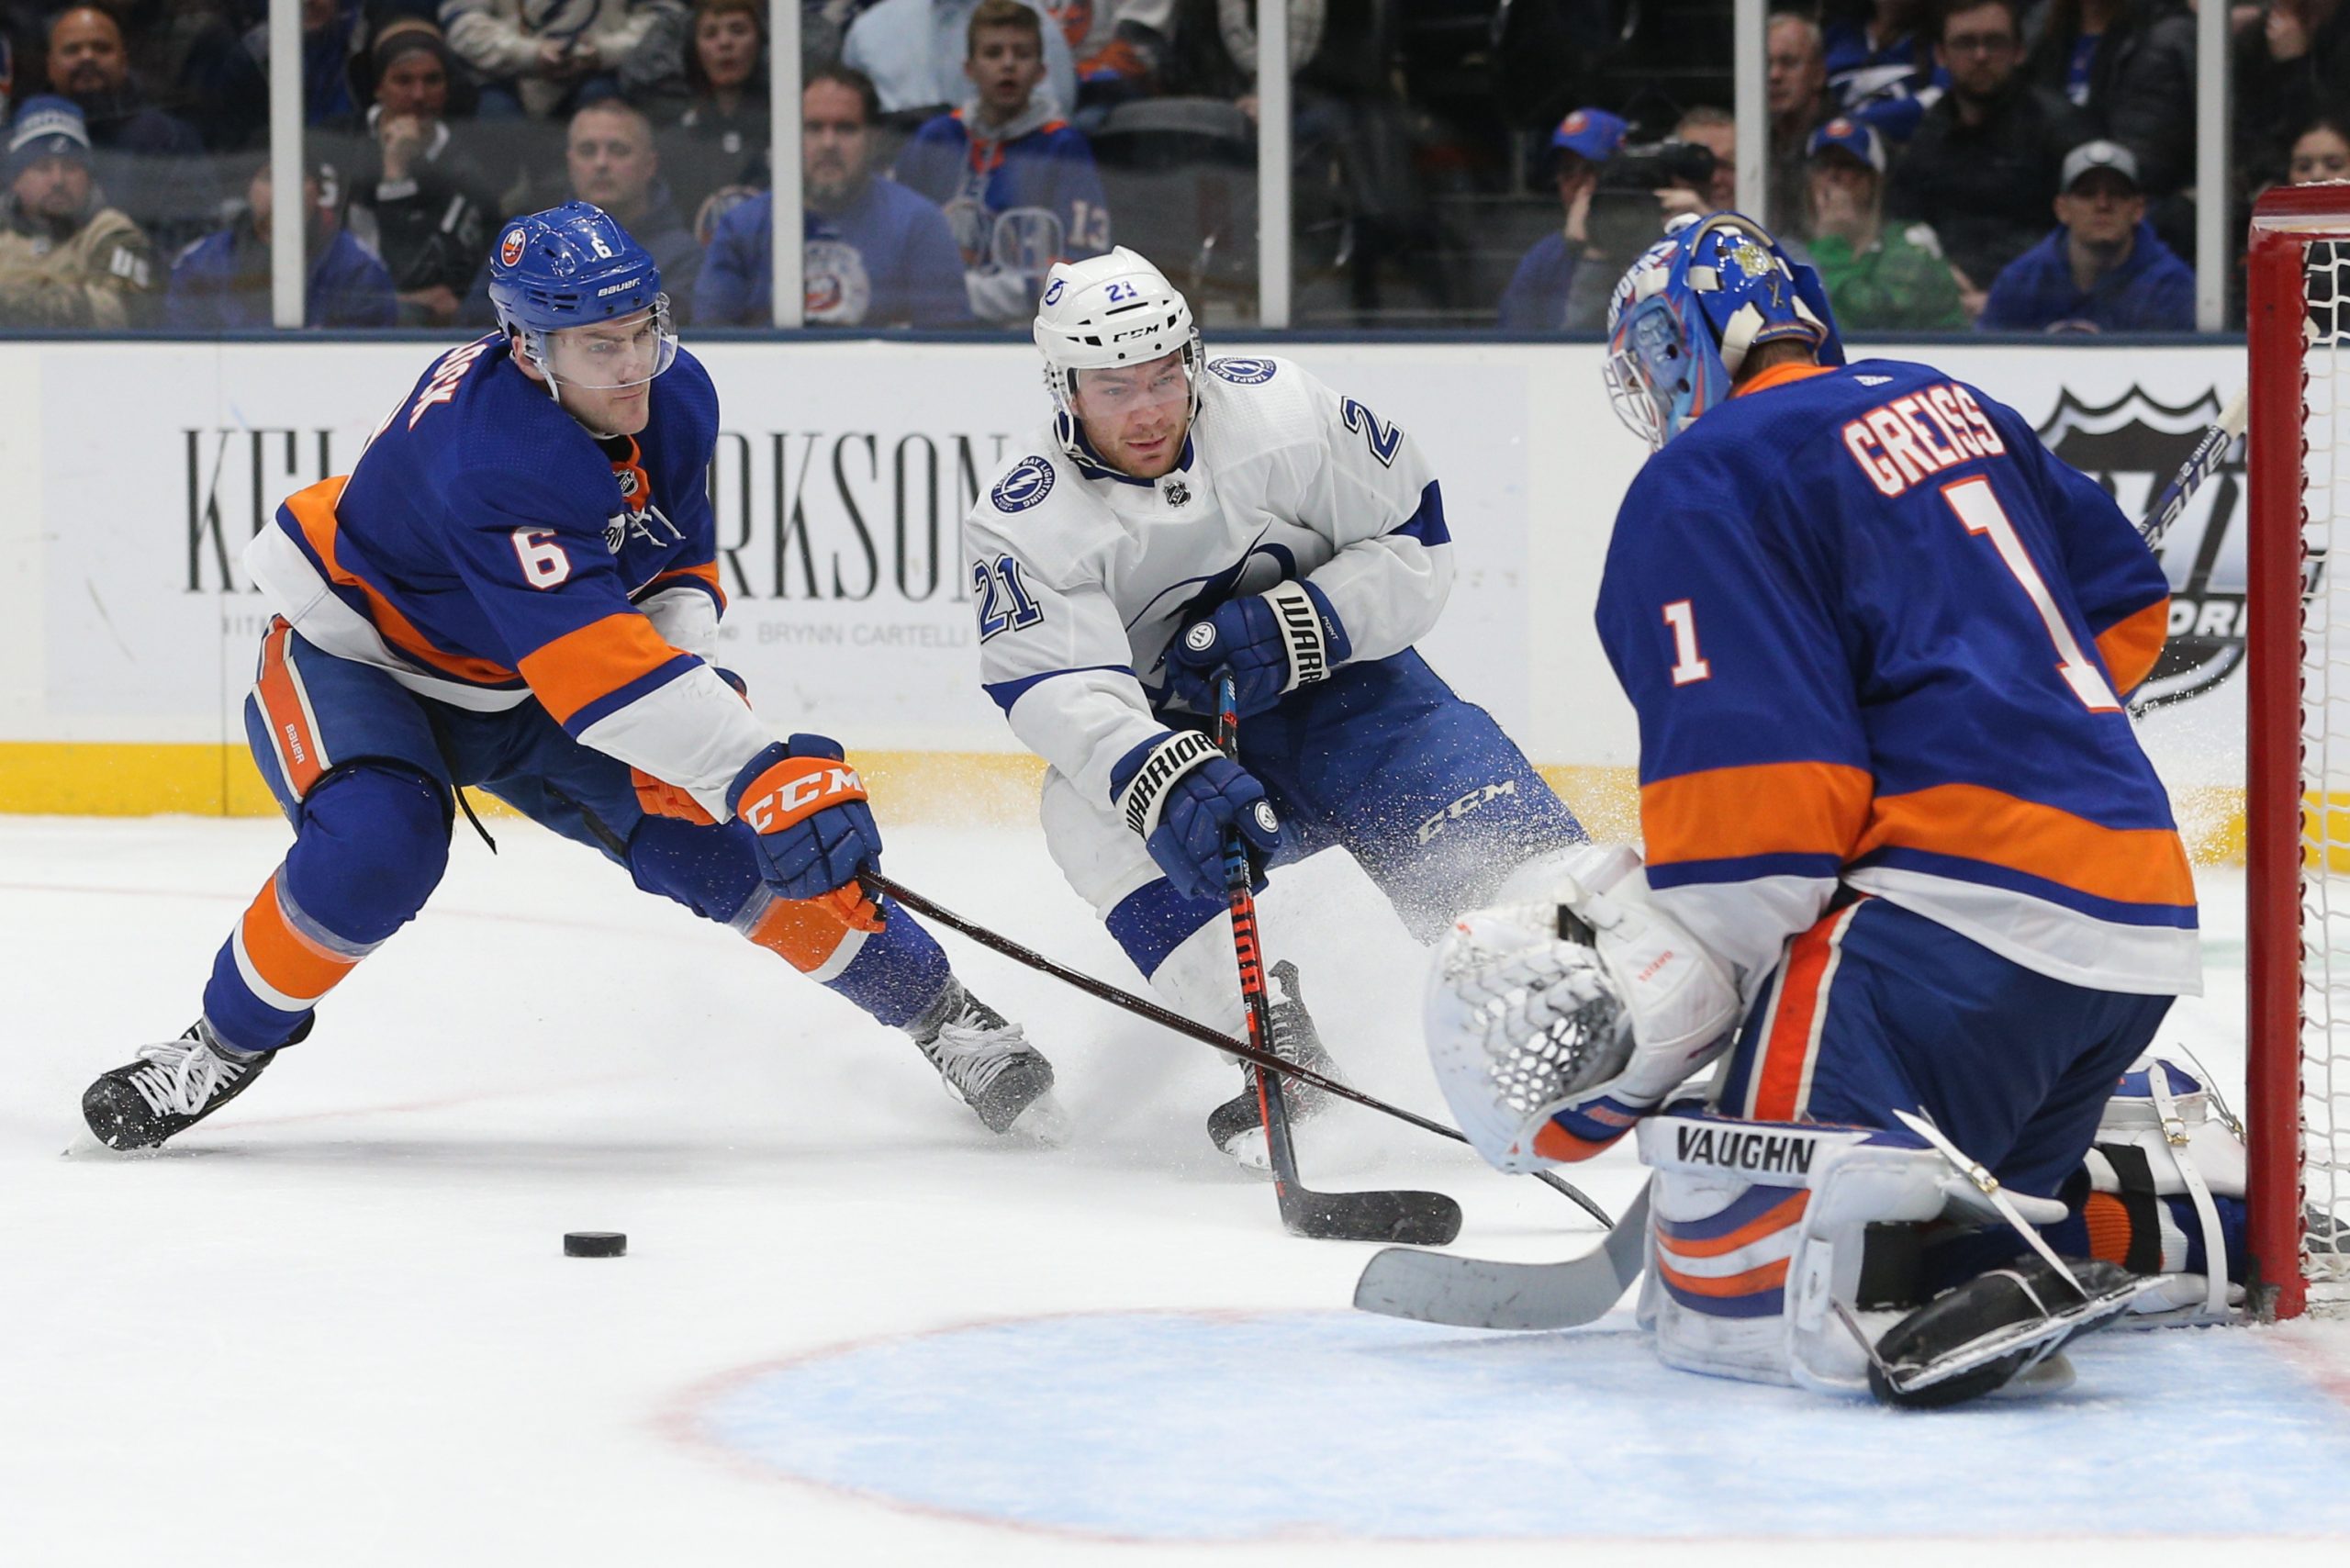 Feb 1, 2019; Uniondale, NY, USA; New York Islanders goalie Thomas Greiss (1) stops a shot by Tampa Bay Lightning center Brayden Point (21) in front of Islanders defenseman Ryan Pulock (6) during the third period at Nassau Veterans Memorial Coliseum. Mandatory Credit: Brad Penner-USA TODAY Sports